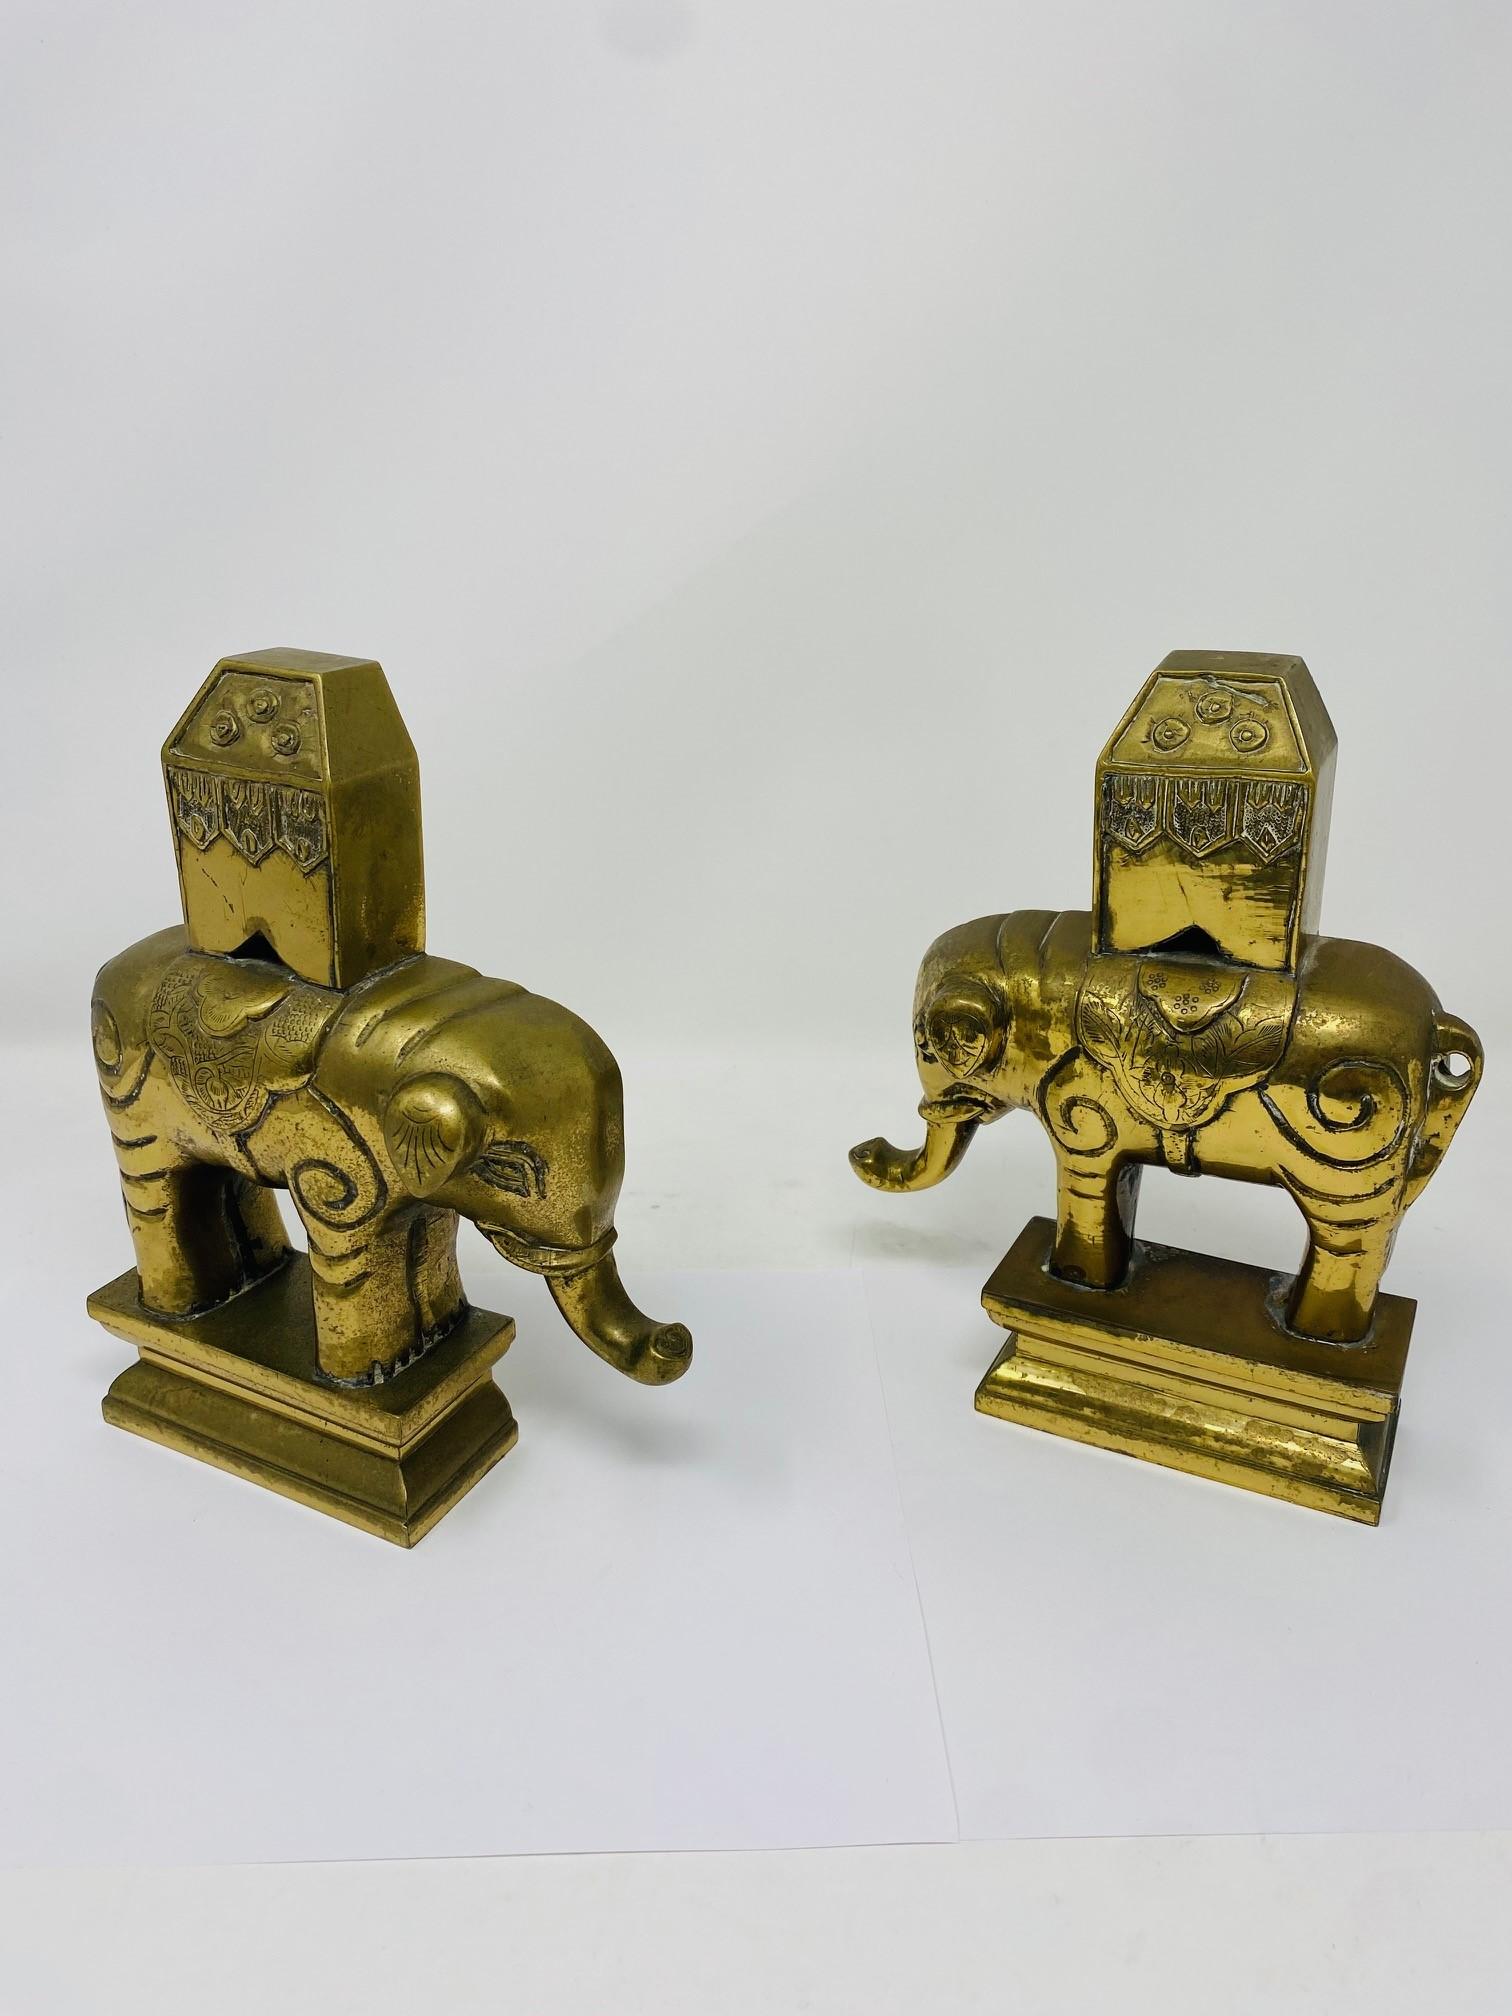 Beautiful and unique pair of sculptural elephant brass bookends.  This beautiful pair comes from the 1940s.  The solid sculpted pair weights 5.1 pounds each, making this pair not only incredibly beautiful but solid in presence.  Each piece is full